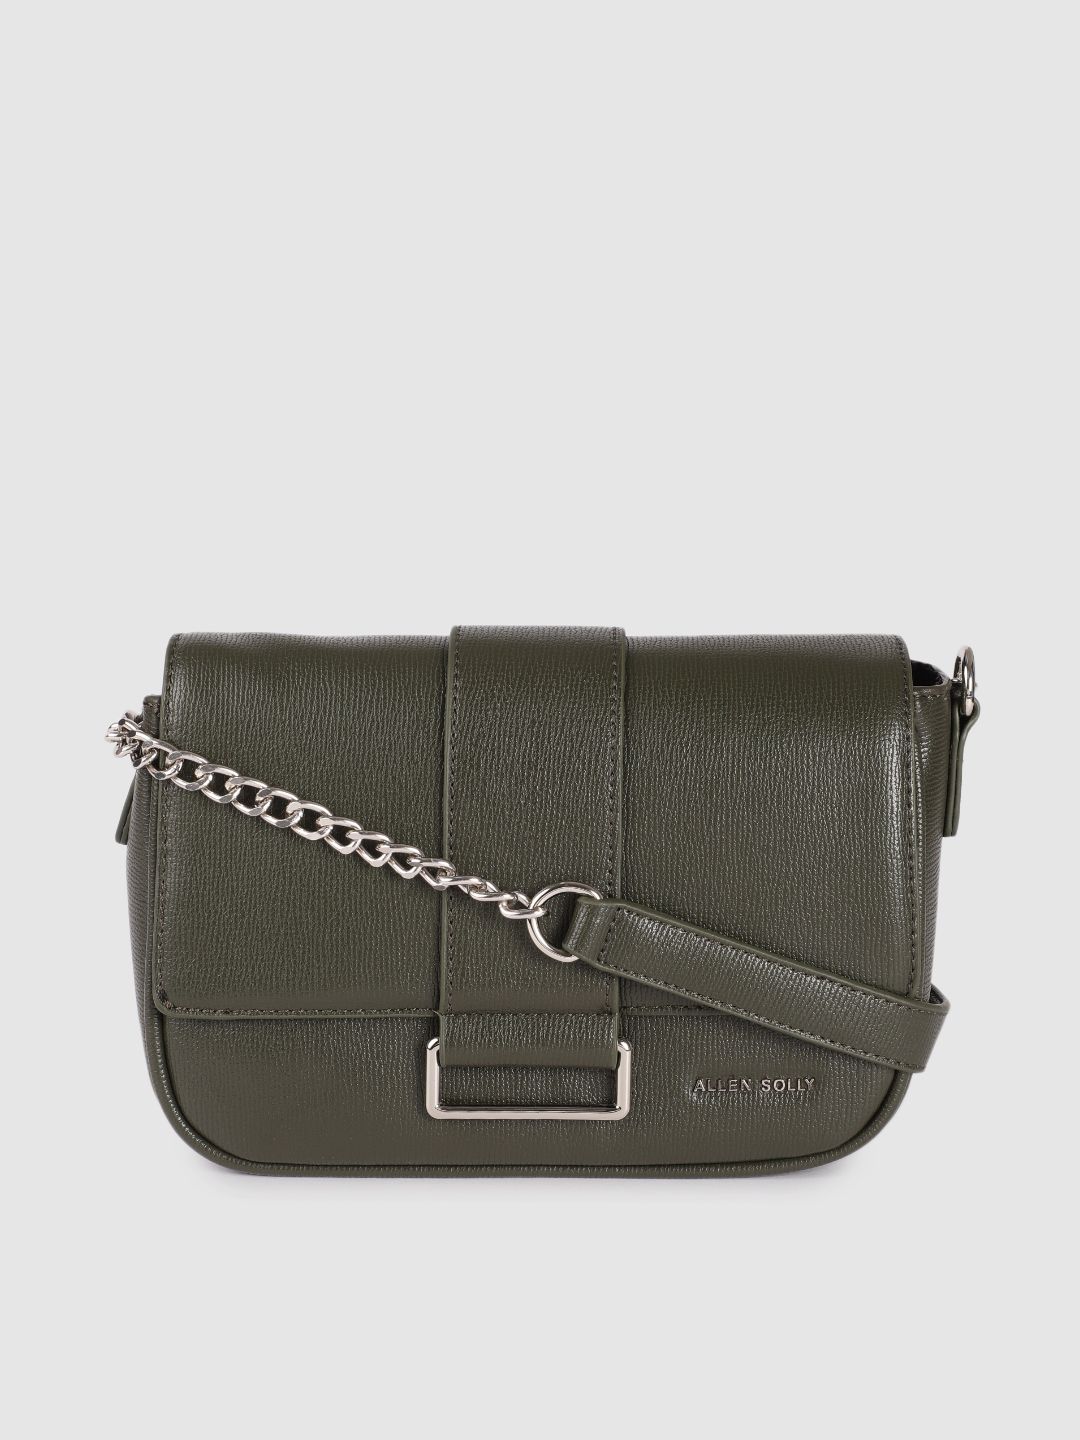 Allen Solly Olive Green Textured PU Structured Sling Bag Price in India